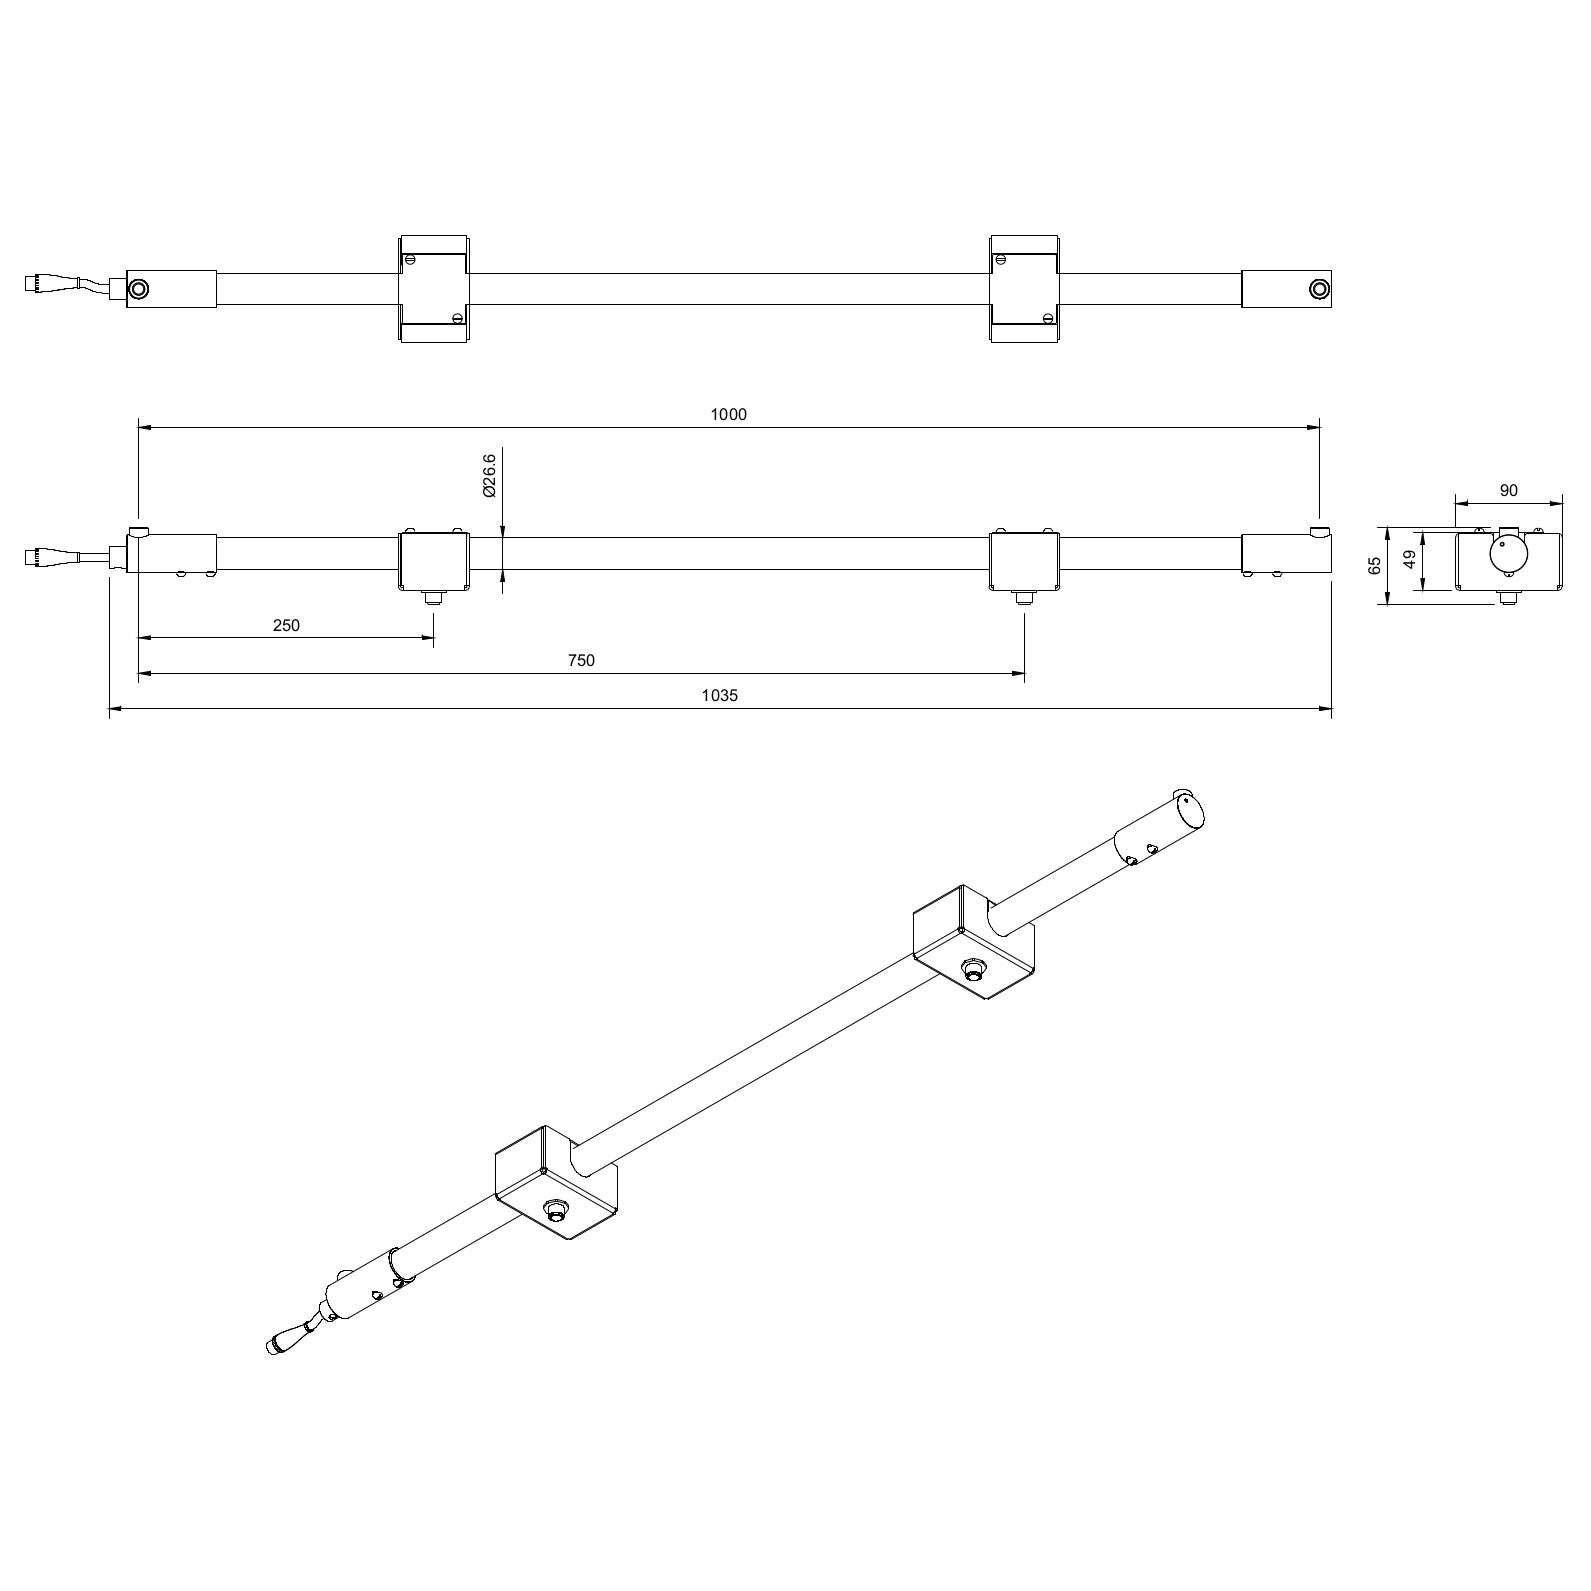 Technical or line drawing of Track-Pipe® 1000mm, a circular economy alternative to track lighting for architects